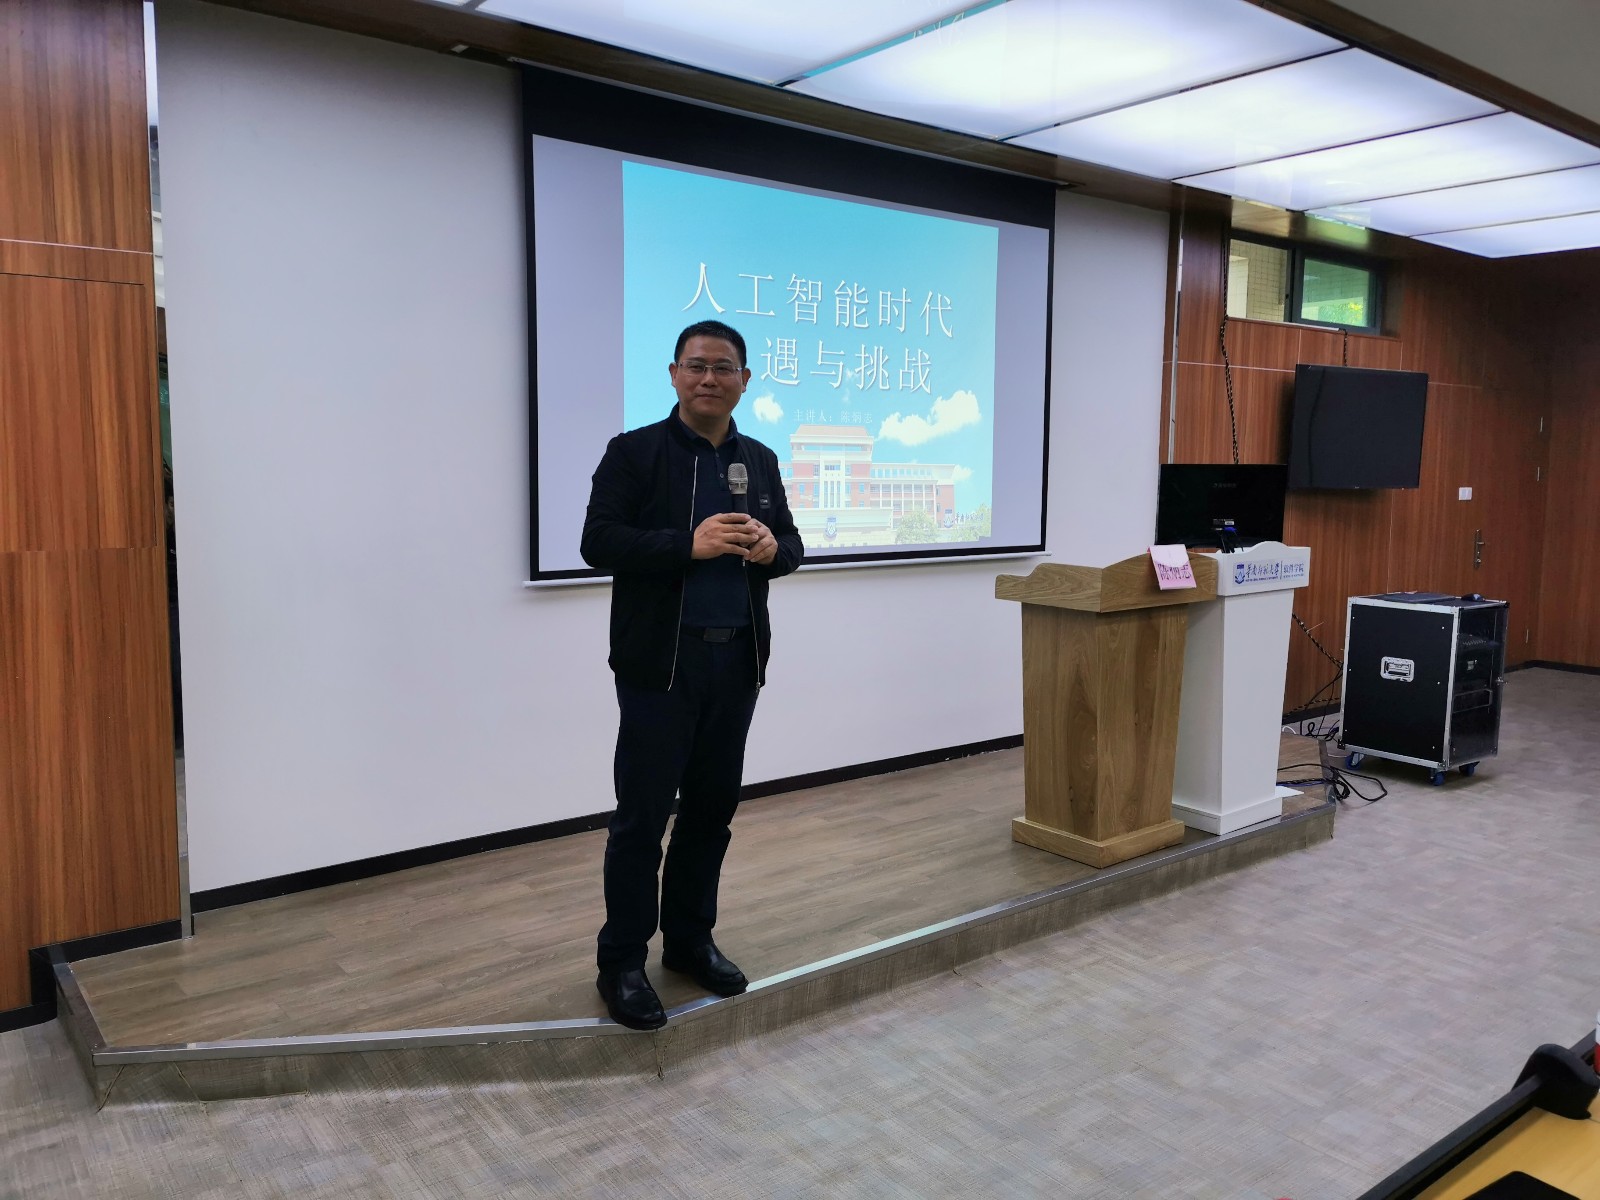 Alumni of the School of Software delivered a lecture for class 19 students